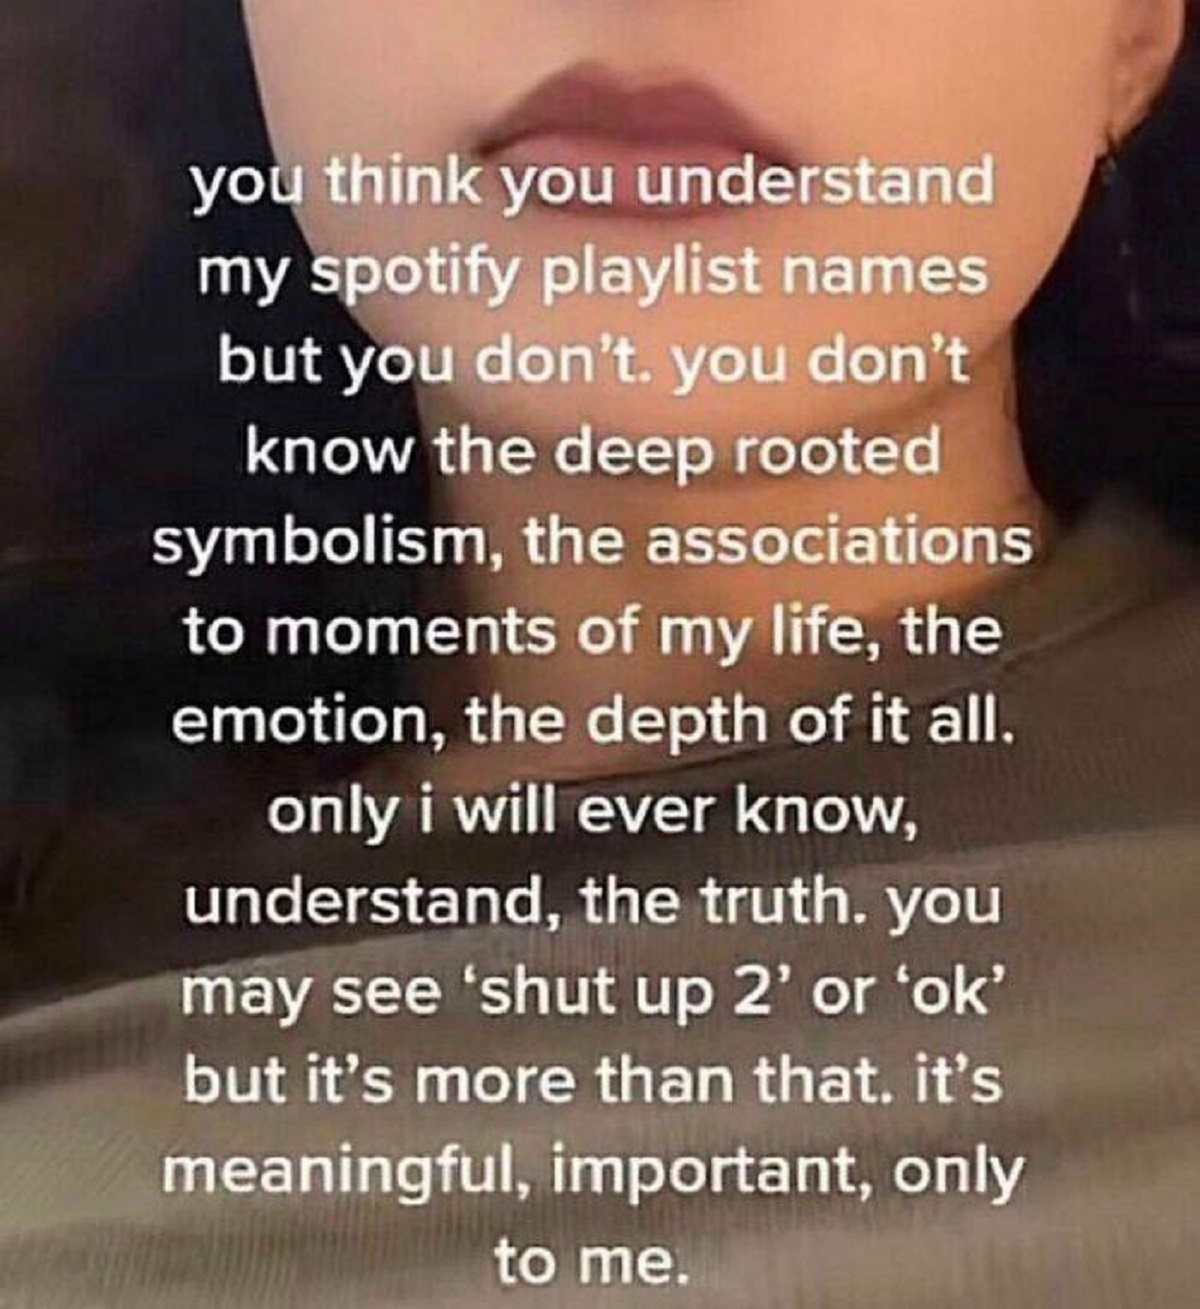 you think you understand my spotify playlist names - you think you understand my spotify playlist names but you don't. you don't know the deep rooted symbolism, the associations to moments of my life, the emotion, the depth of it all. only i will ever kno